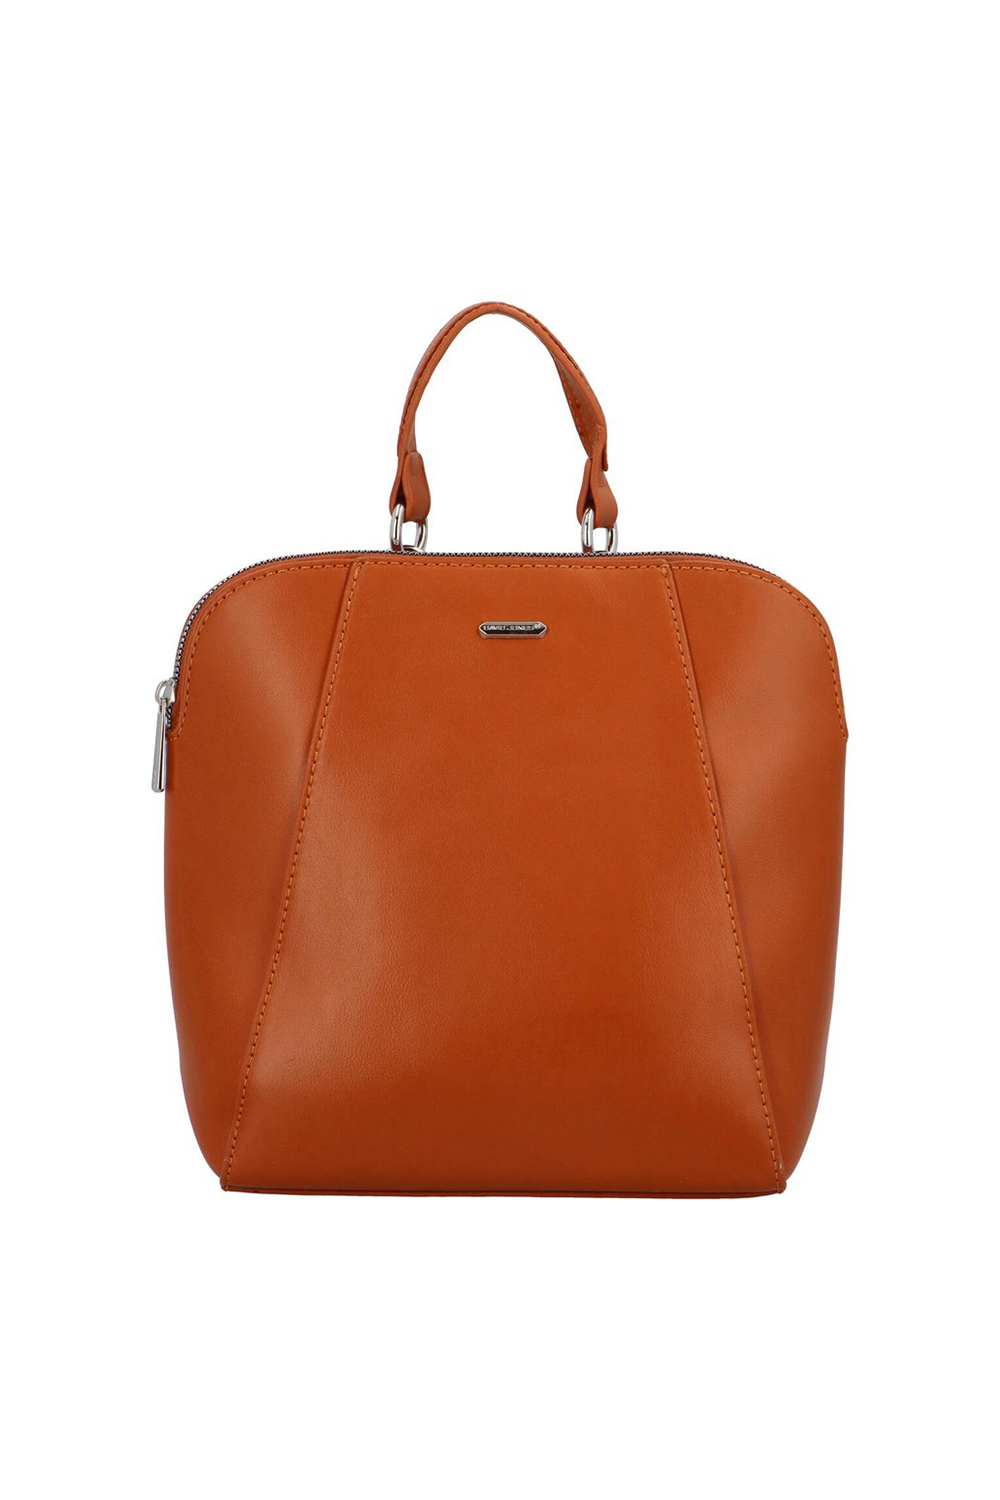 David Jones 6833-2 | Cognac | Back Pack - Accessories from North Shoes UK